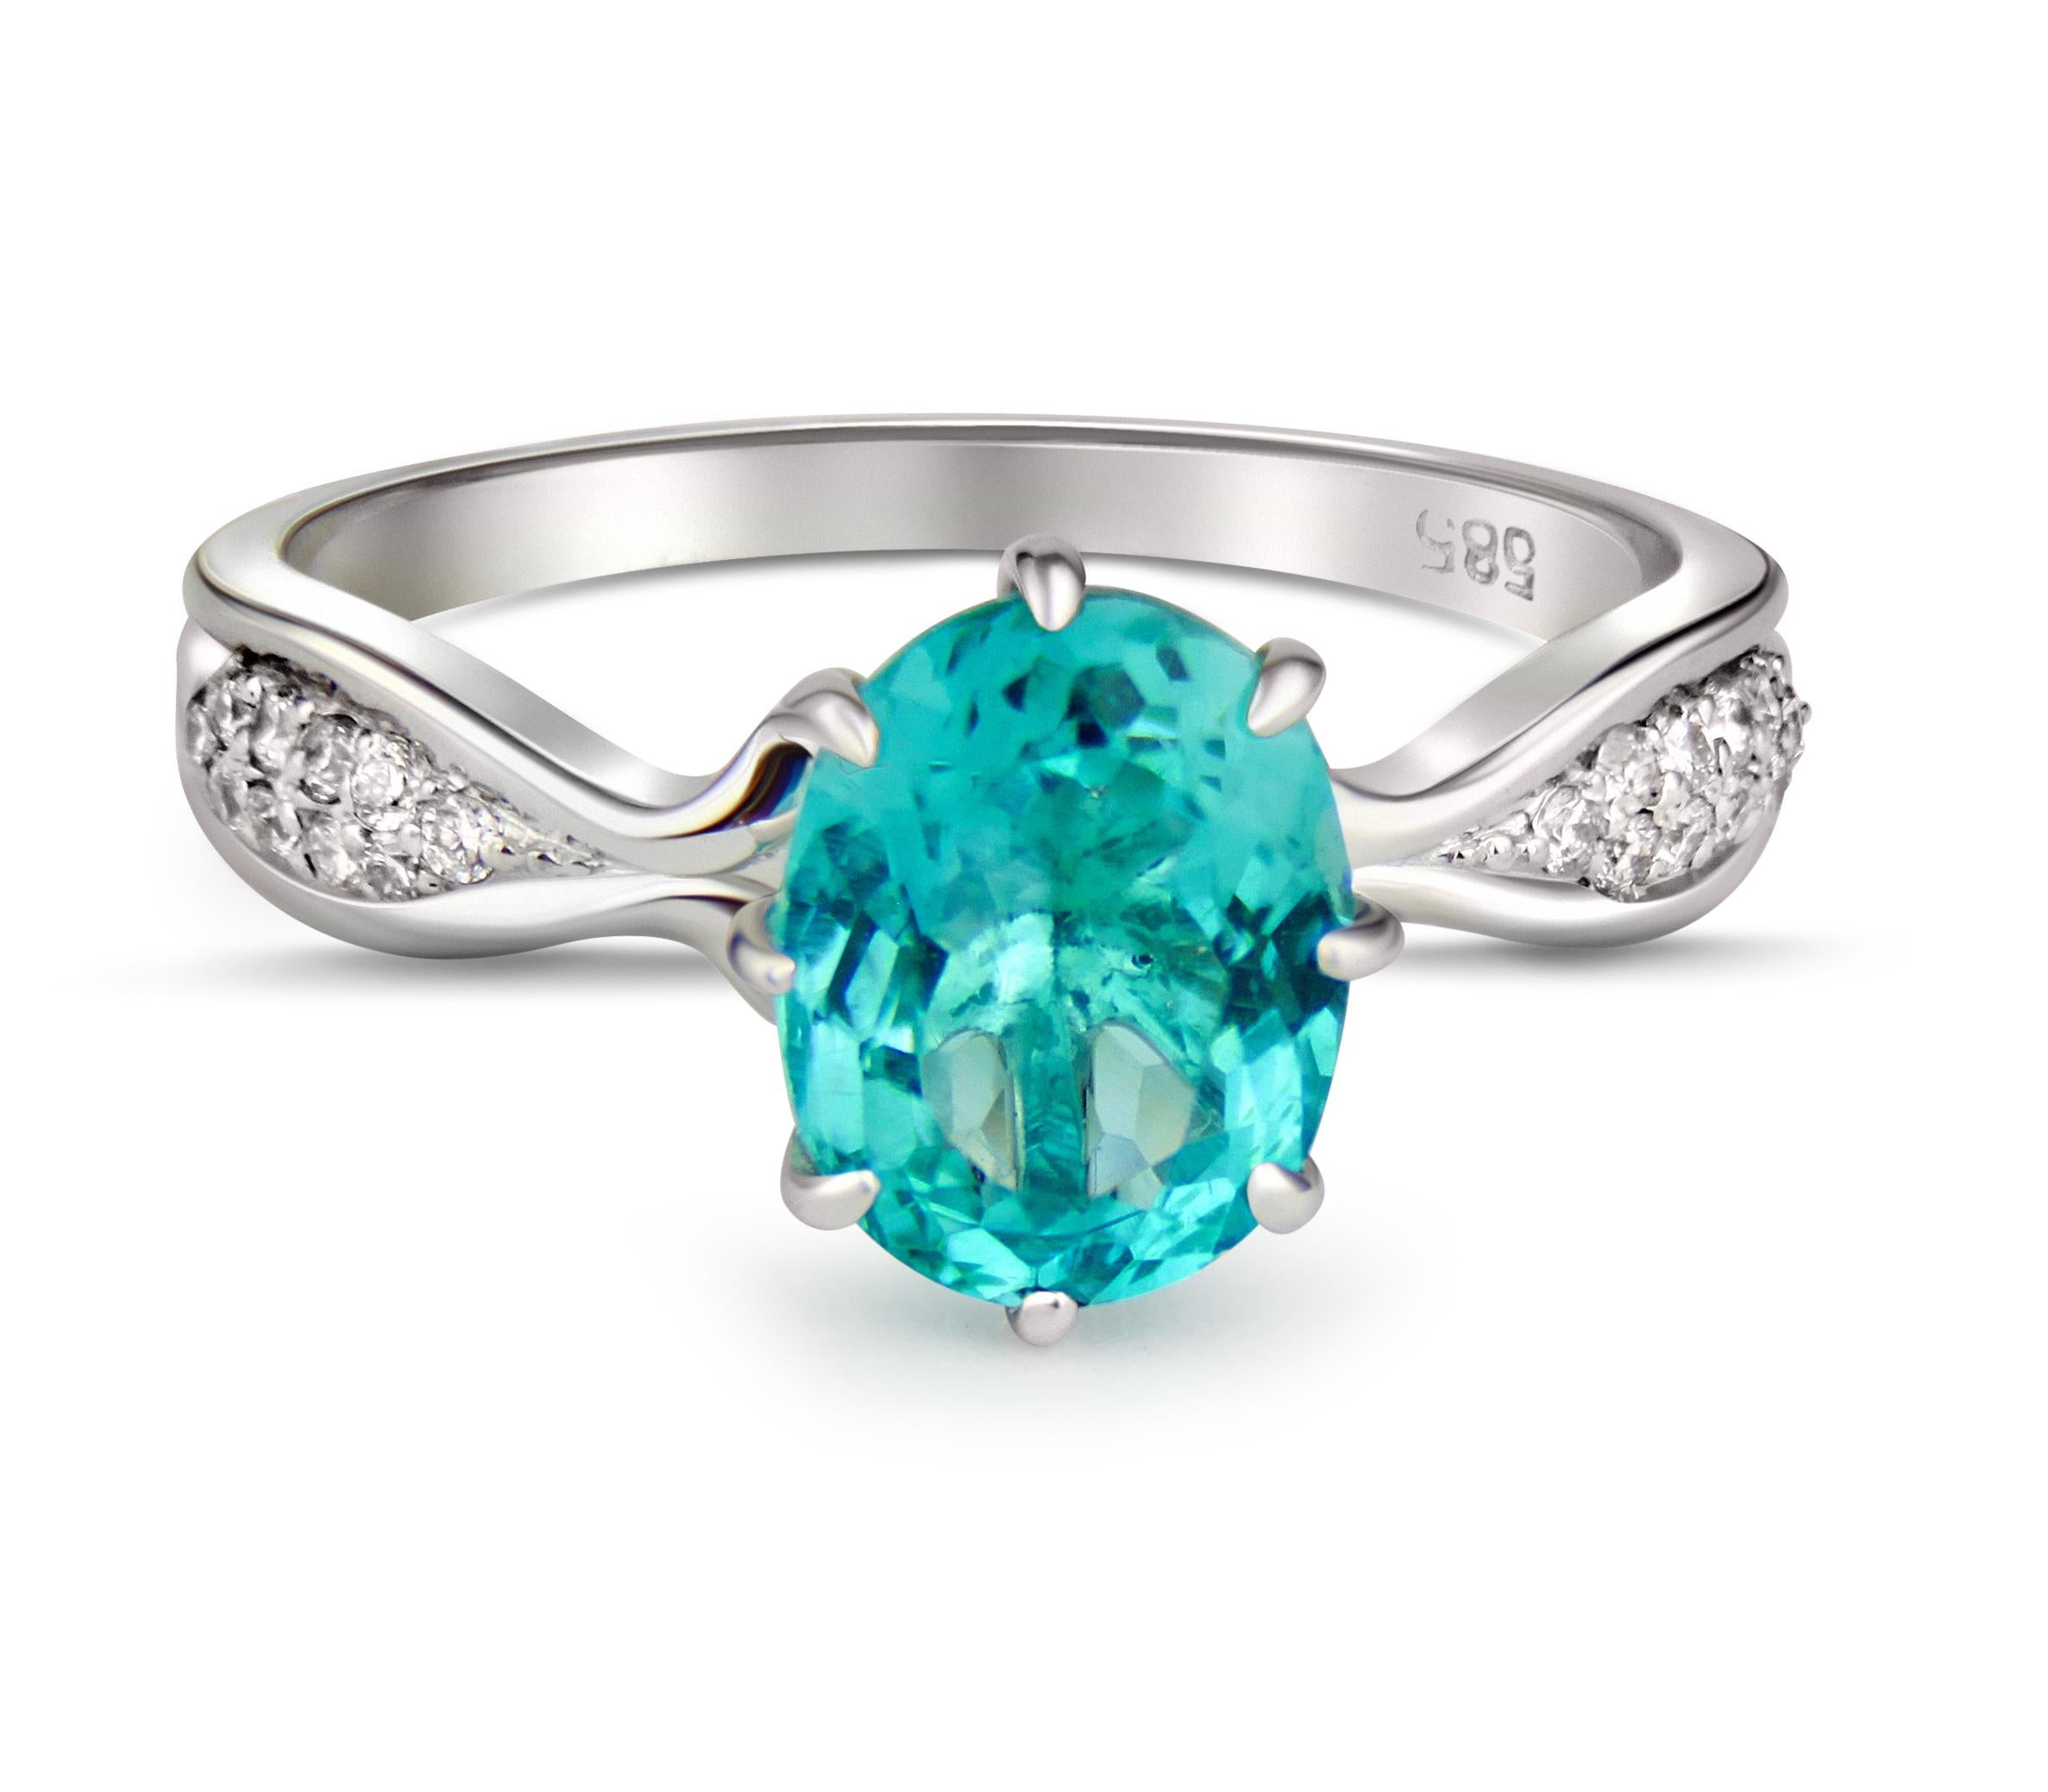 Paraiba blue apatite 14k gold ring. 
Oval Apatite Engagement Ring with Diamonds on sides. Natural Blue Apatite Ring.
 
Metal: 14k solid gold
Weight: 2.1 g (depends from size).

Main stone - apatite, paraiba blue-green color, pear cut, 1 ct weight,